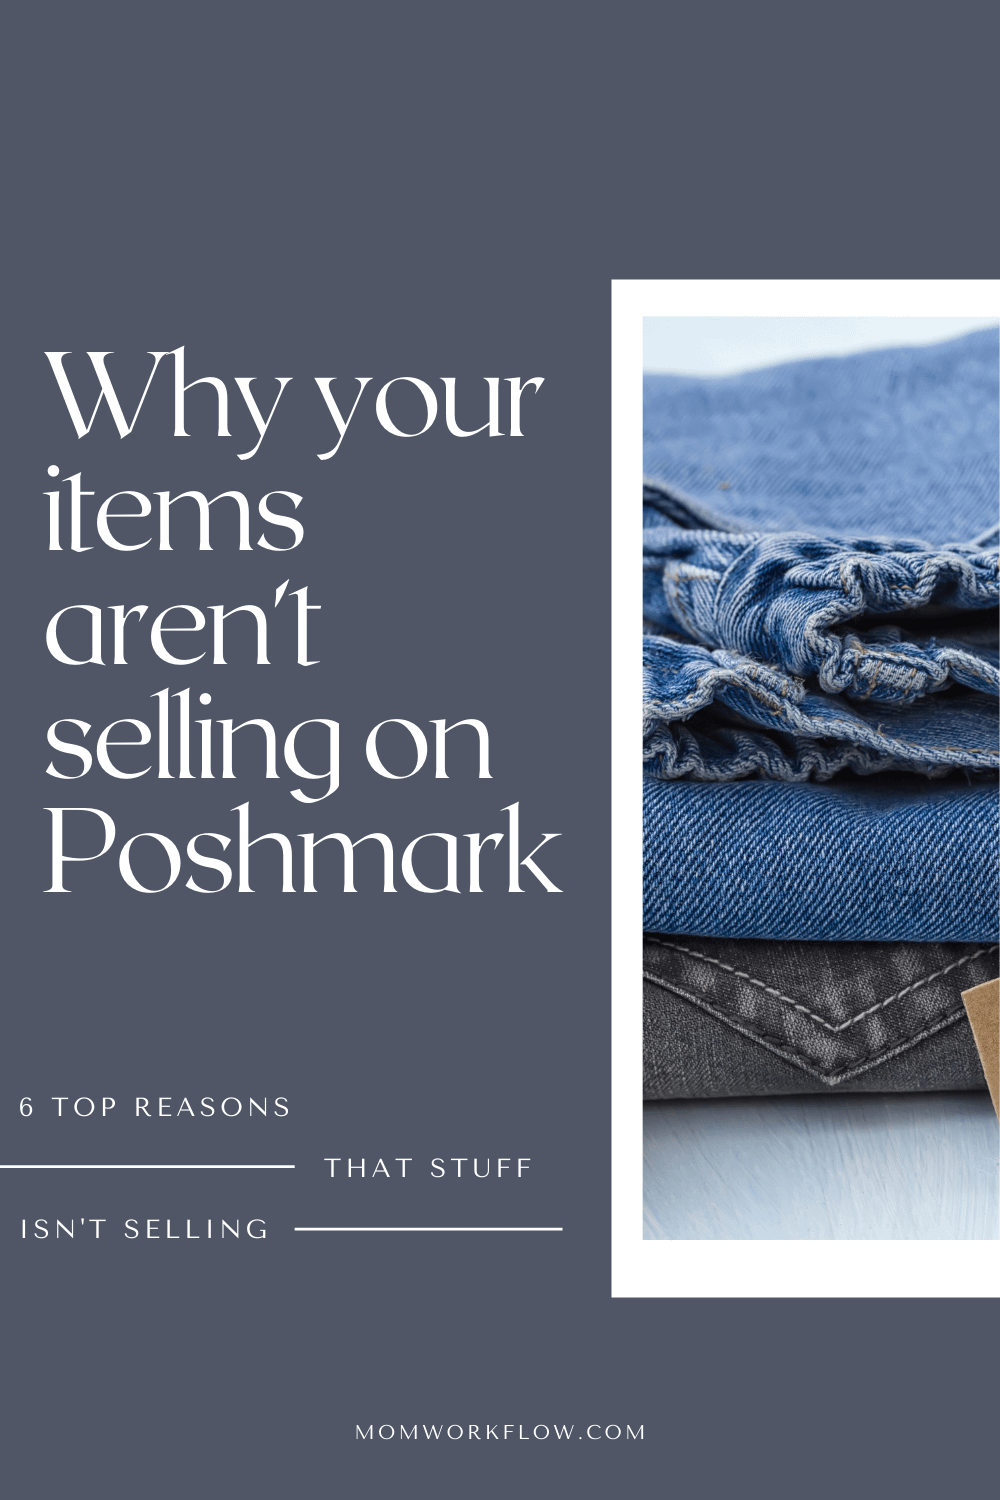 Why your items aren't selling on Poshmark: 6 top reasons that stuff isn't selling